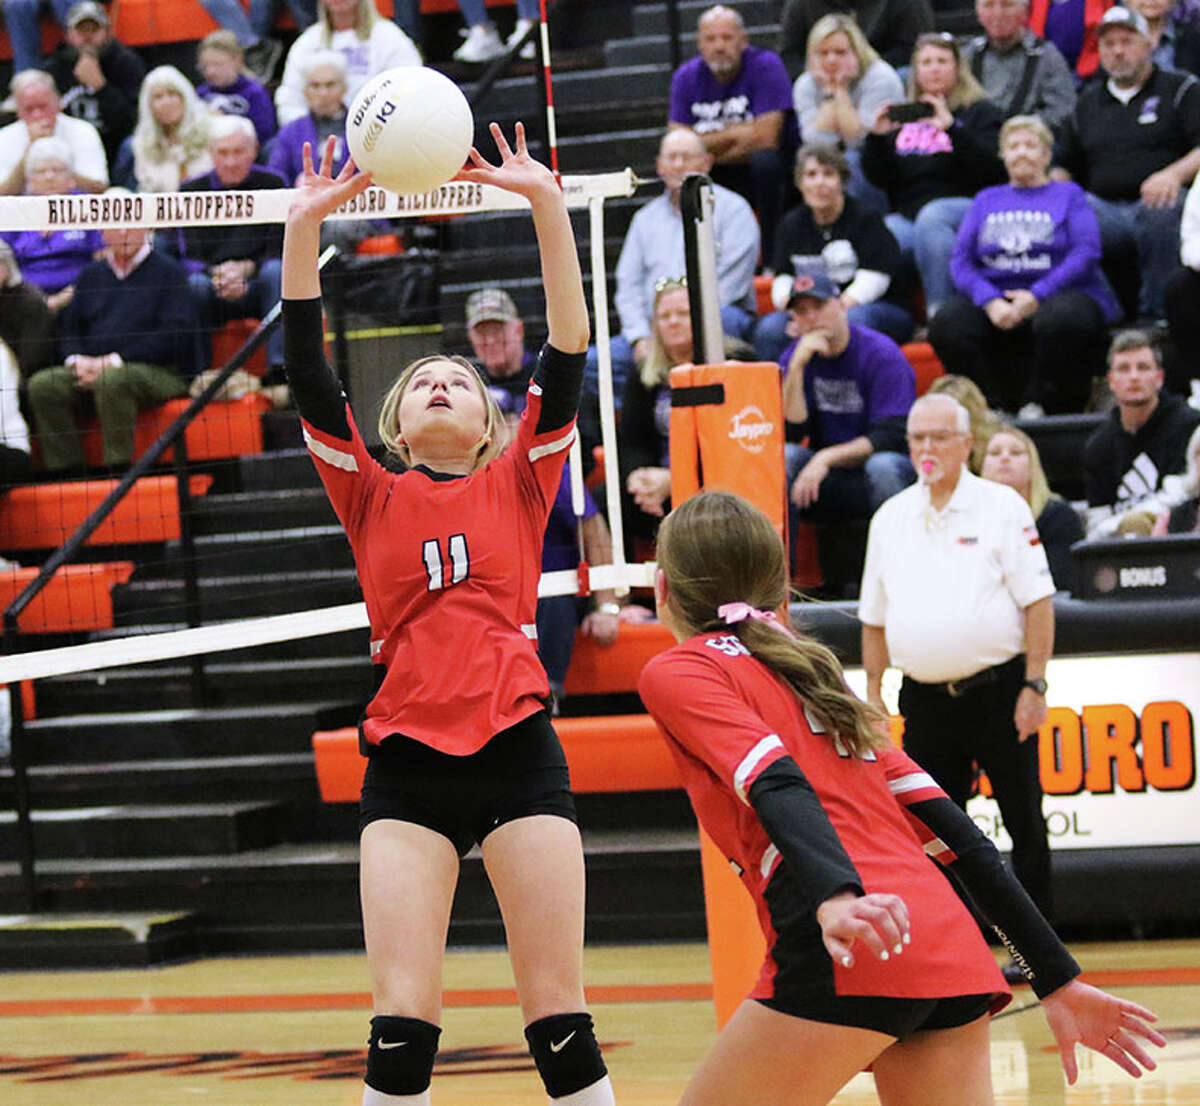 Staunton's Allison Weller (11) sets while Kennedy Legendre approaches the net against Breese Central on Thursday night in the title match of the Hillsboro Class 2A Regional.